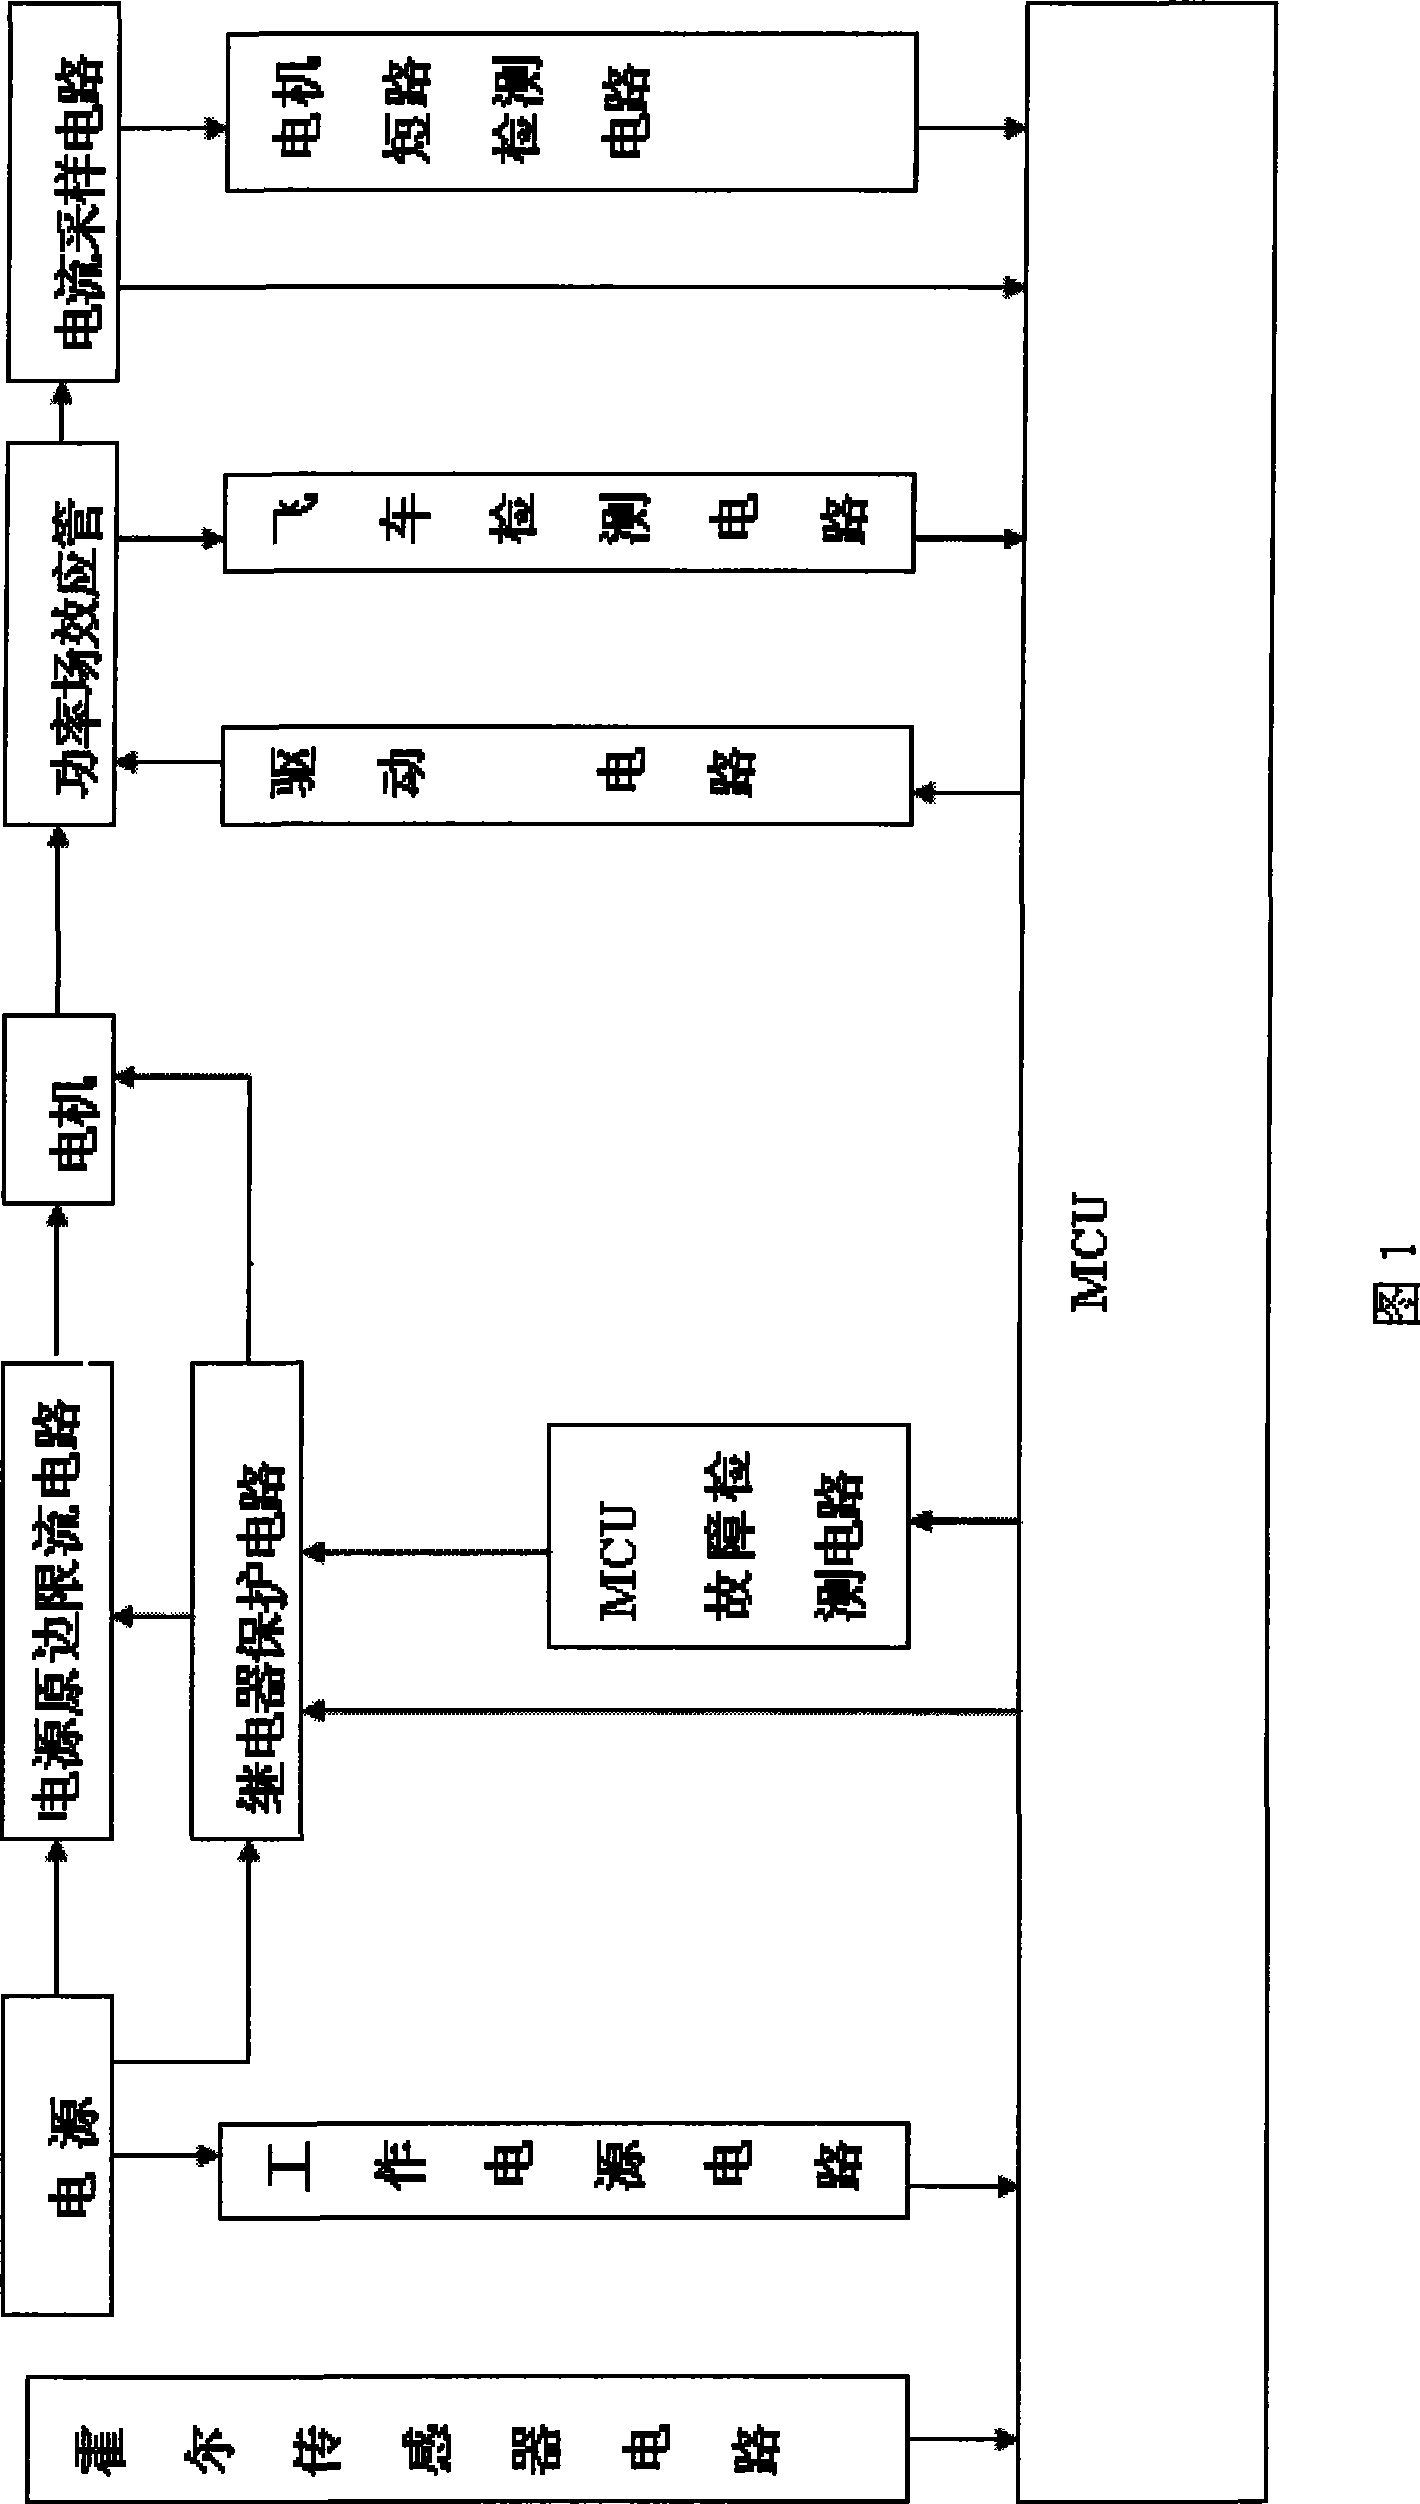 Control circuit for intelligent electric vehicle controller